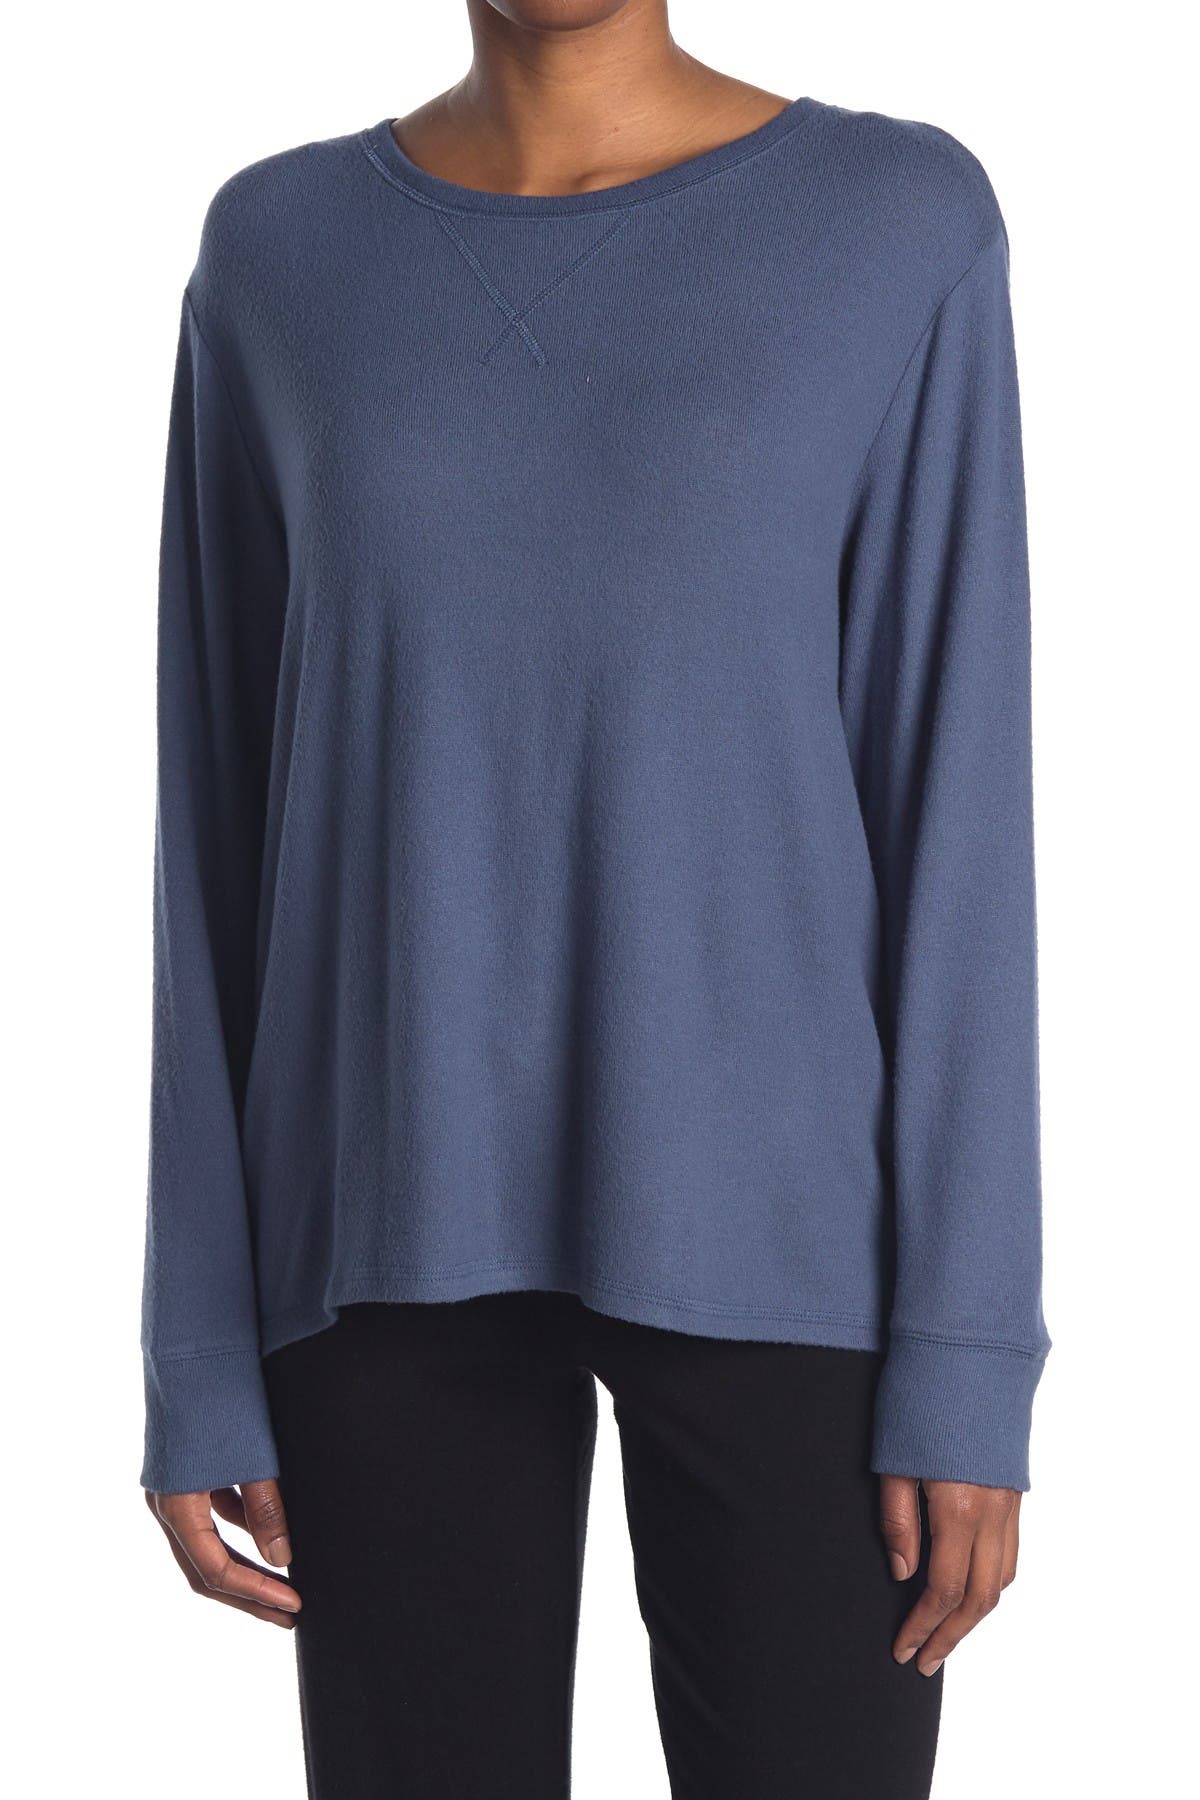 Free Press | Hacci Knit Lounge Pullover | Nordstrom Rack